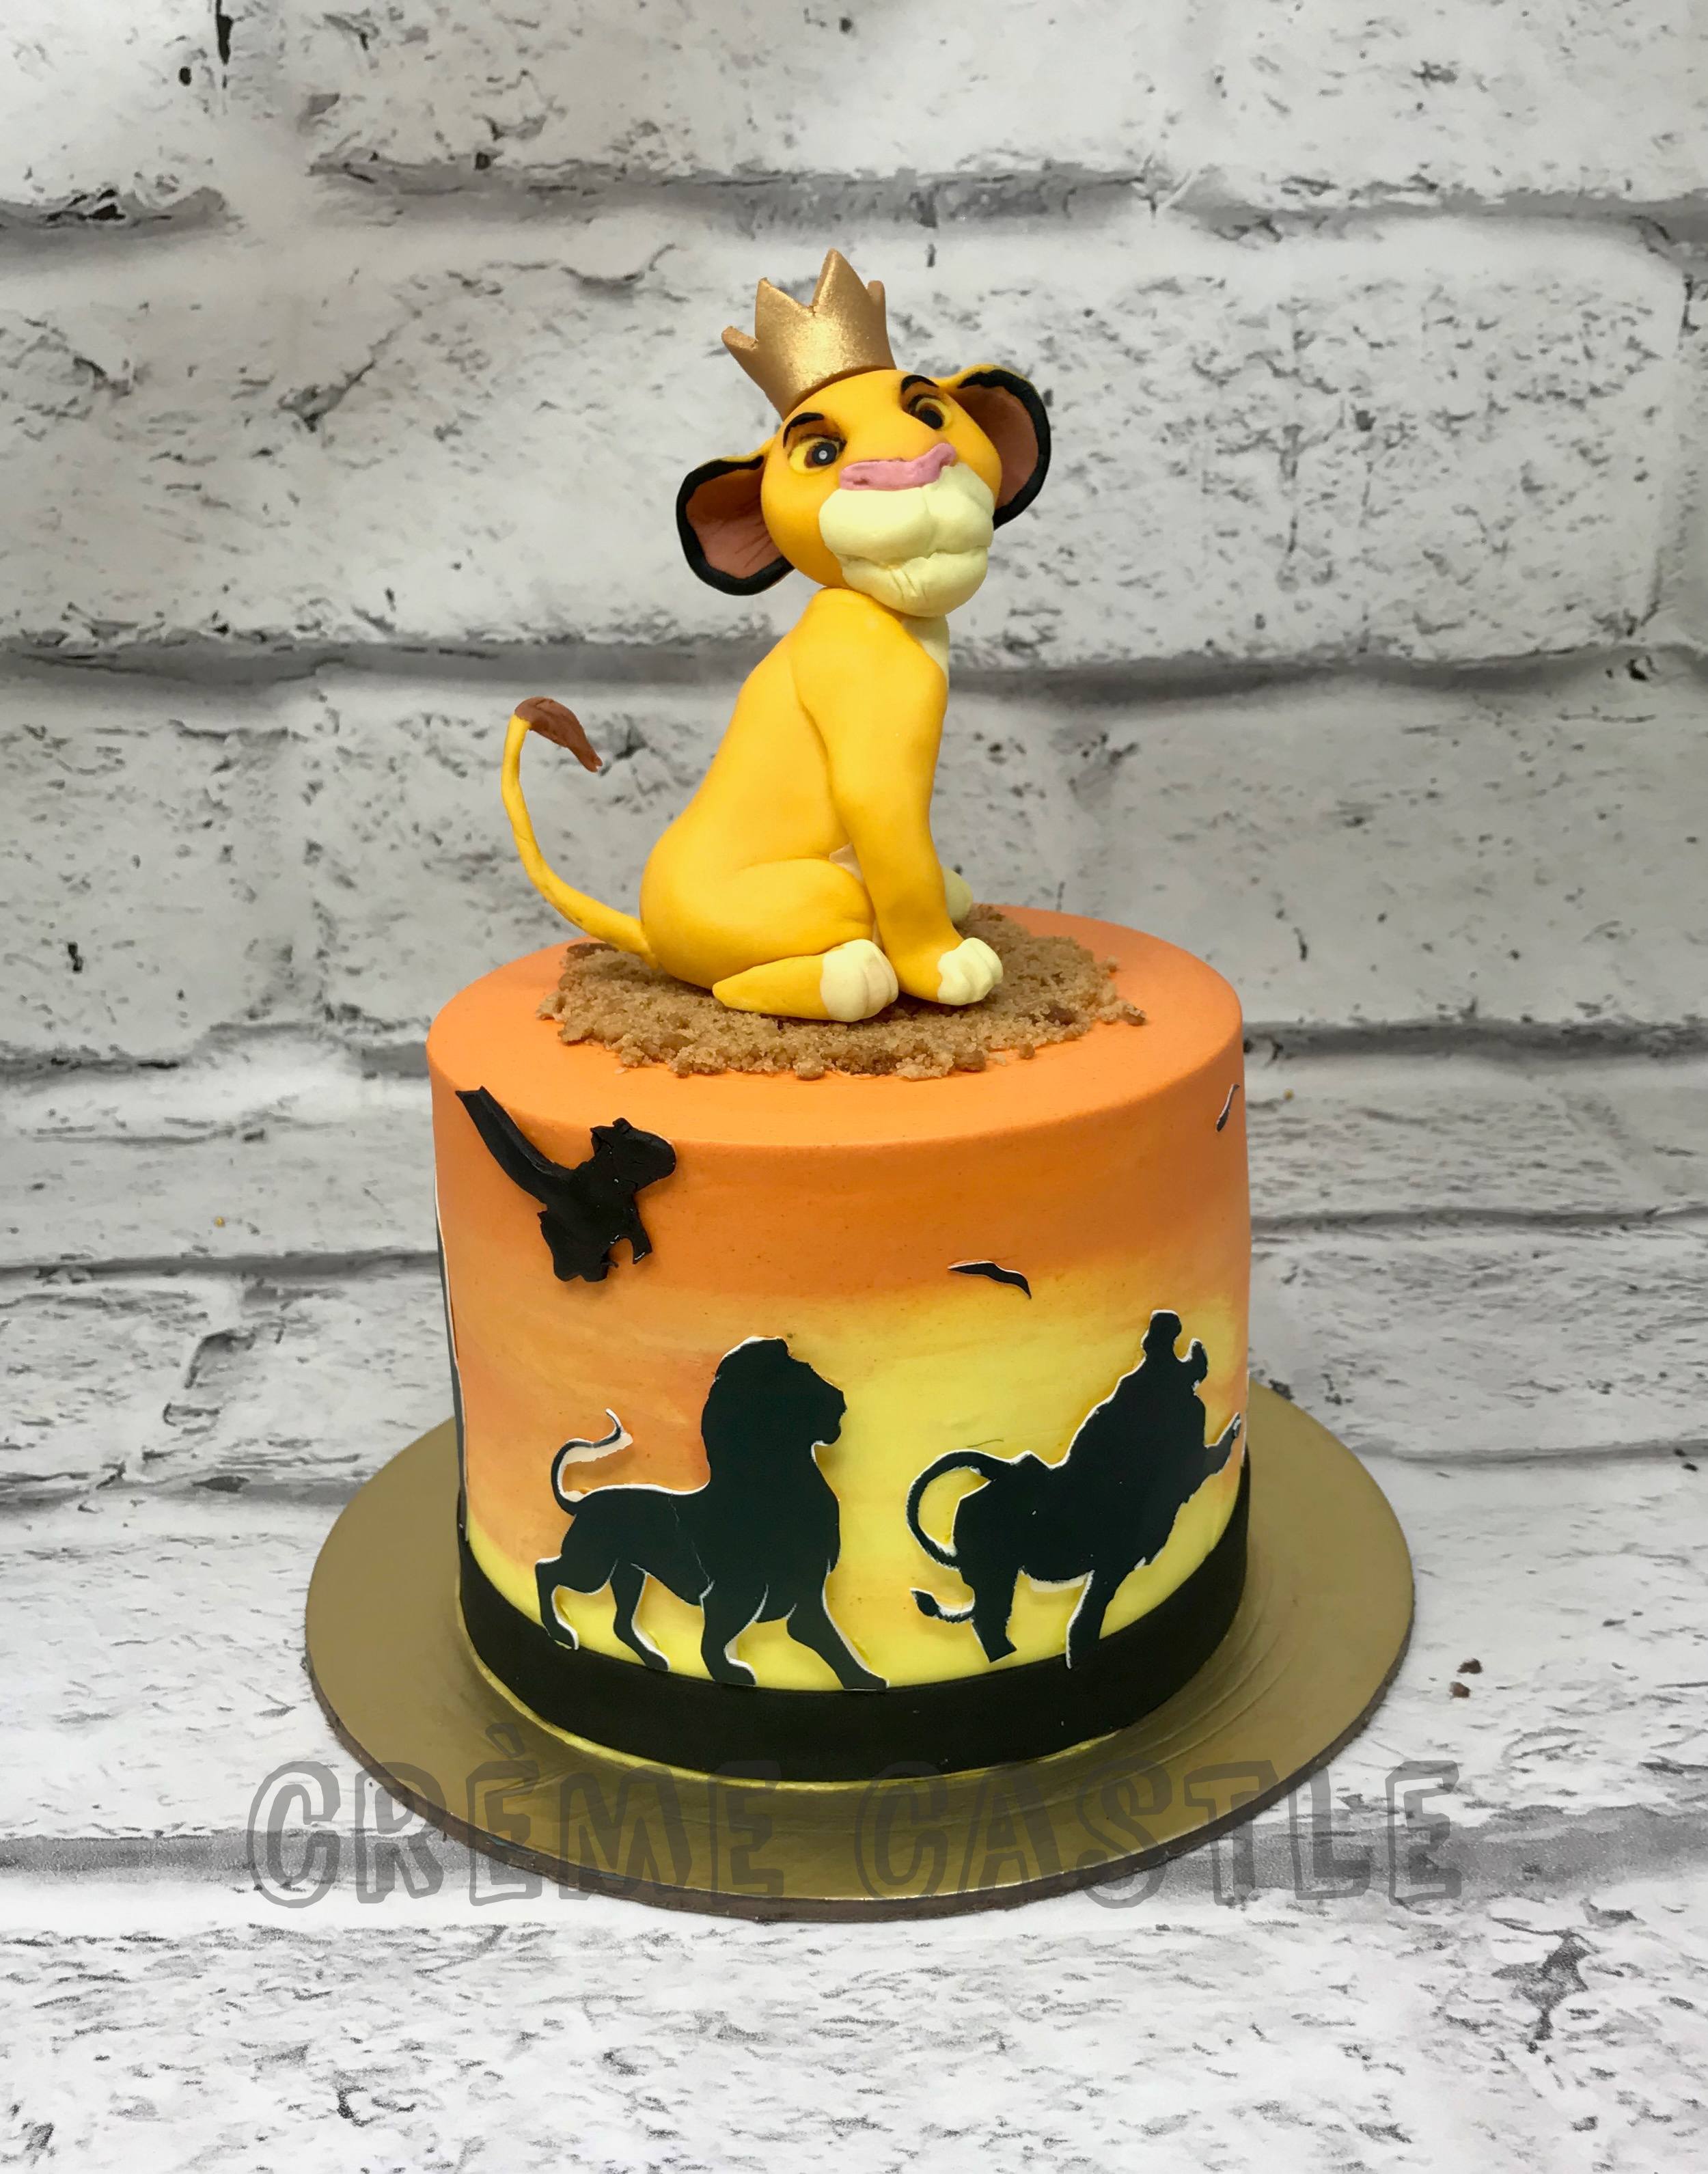 Amazon.com: Lion King Birthday Cake Topper with Simba and Decorative Themed  Accessories (Unique Design) : Grocery & Gourmet Food